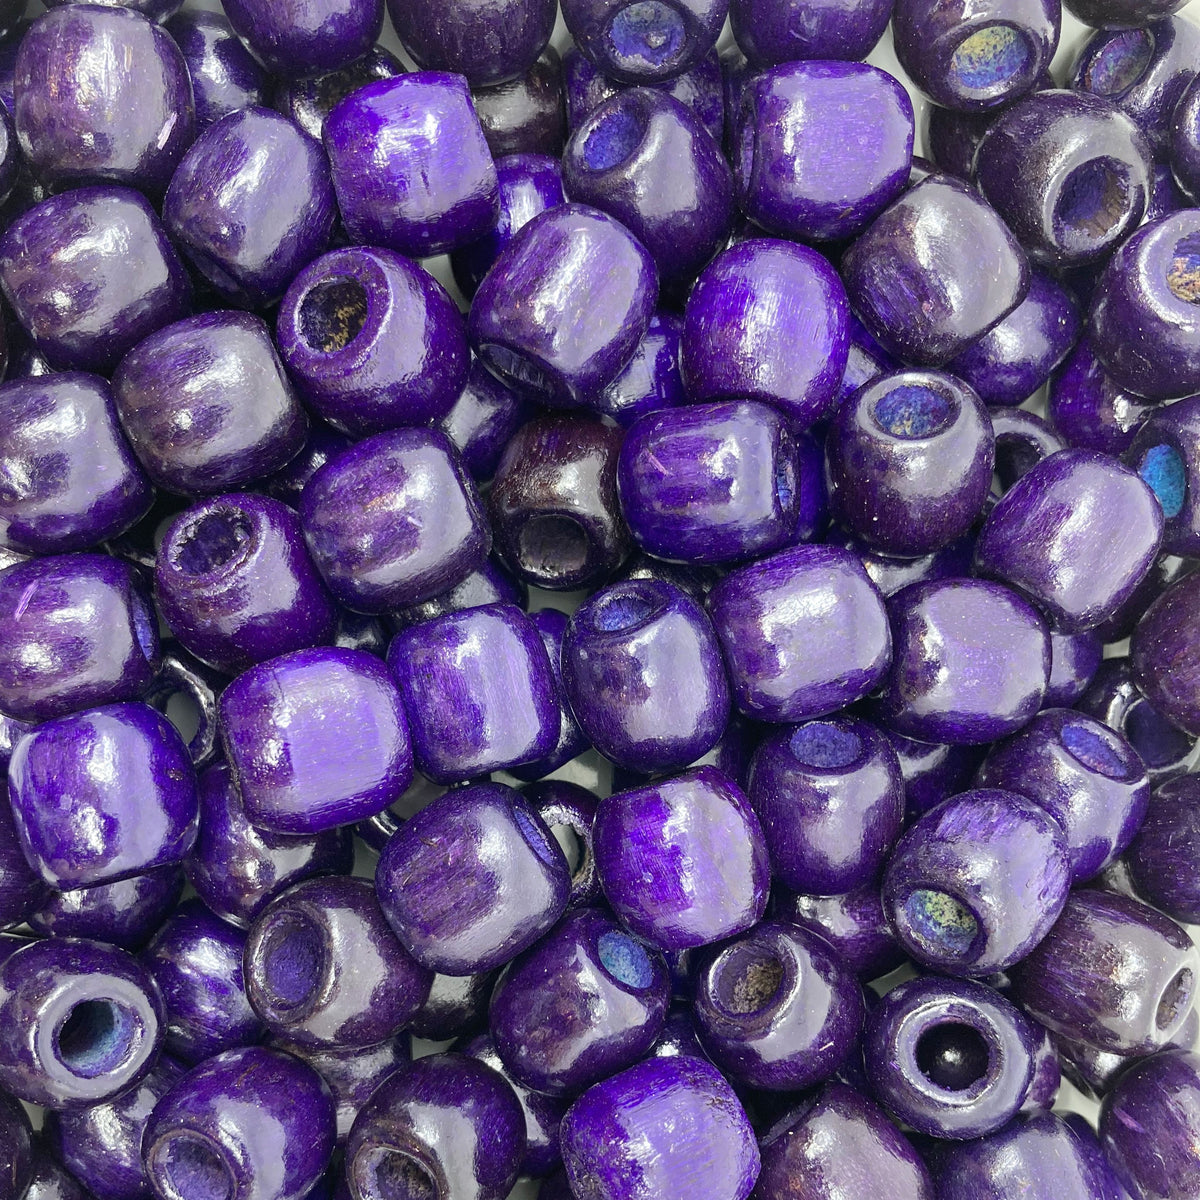 30 14mm x 8mm Large Hole Purple Beads Macrame Plastic Rondelle Beads by Smileyboy | Michaels